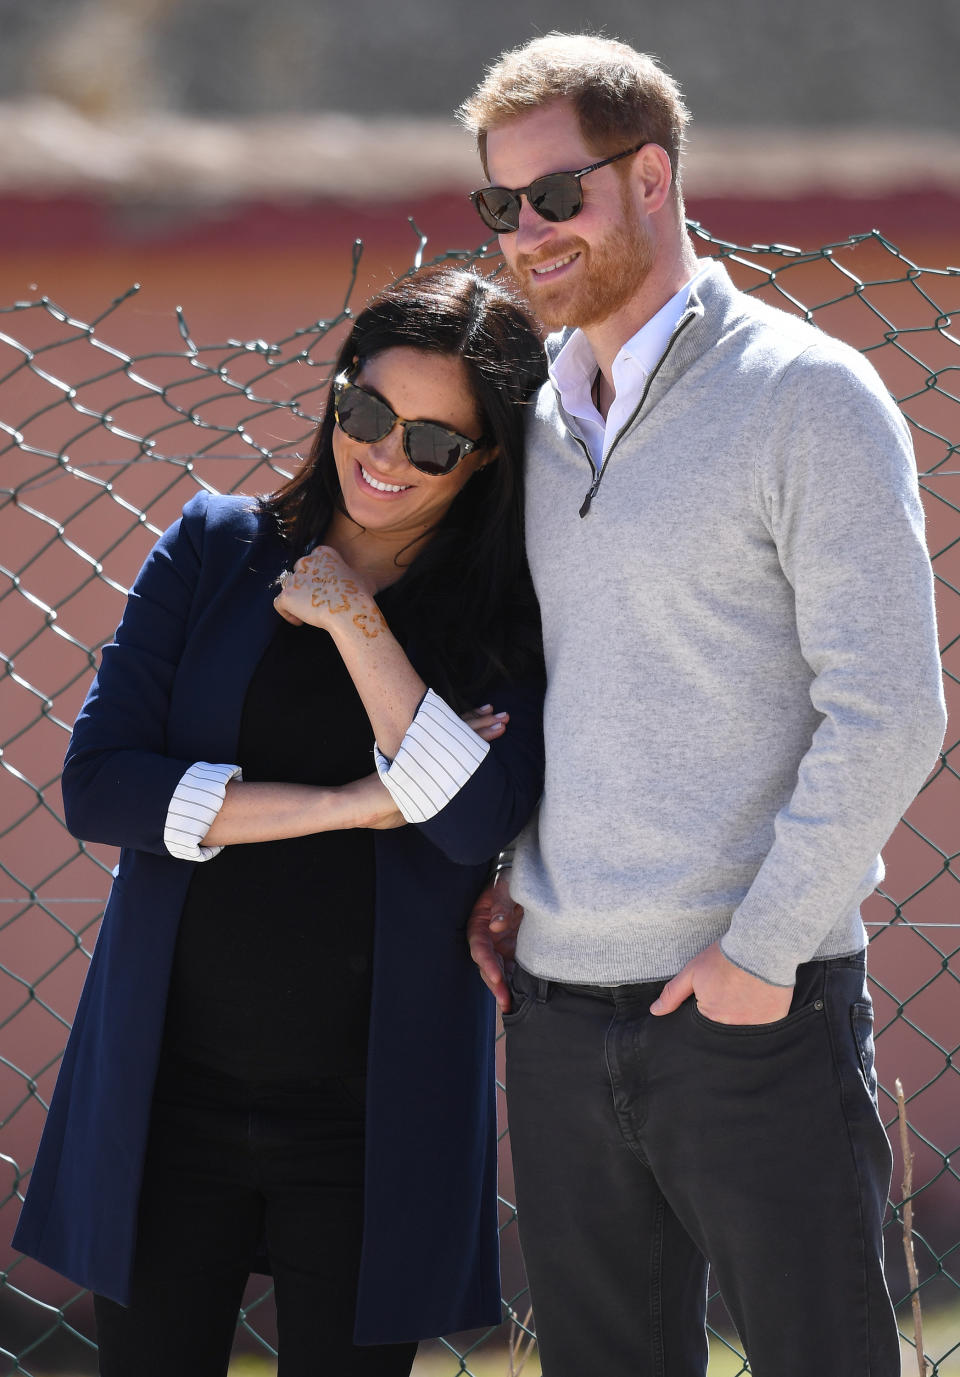 Prince Harry, Duke of Sussex, and Meghan Markle, Duchess of Sussex, visit LycÃ©e Qualifiant Grand Atlas and meet students and teachers in Asni Town, Atlas Mountains, Morocco, on the 24th February 2019.  Picture by James Whatling